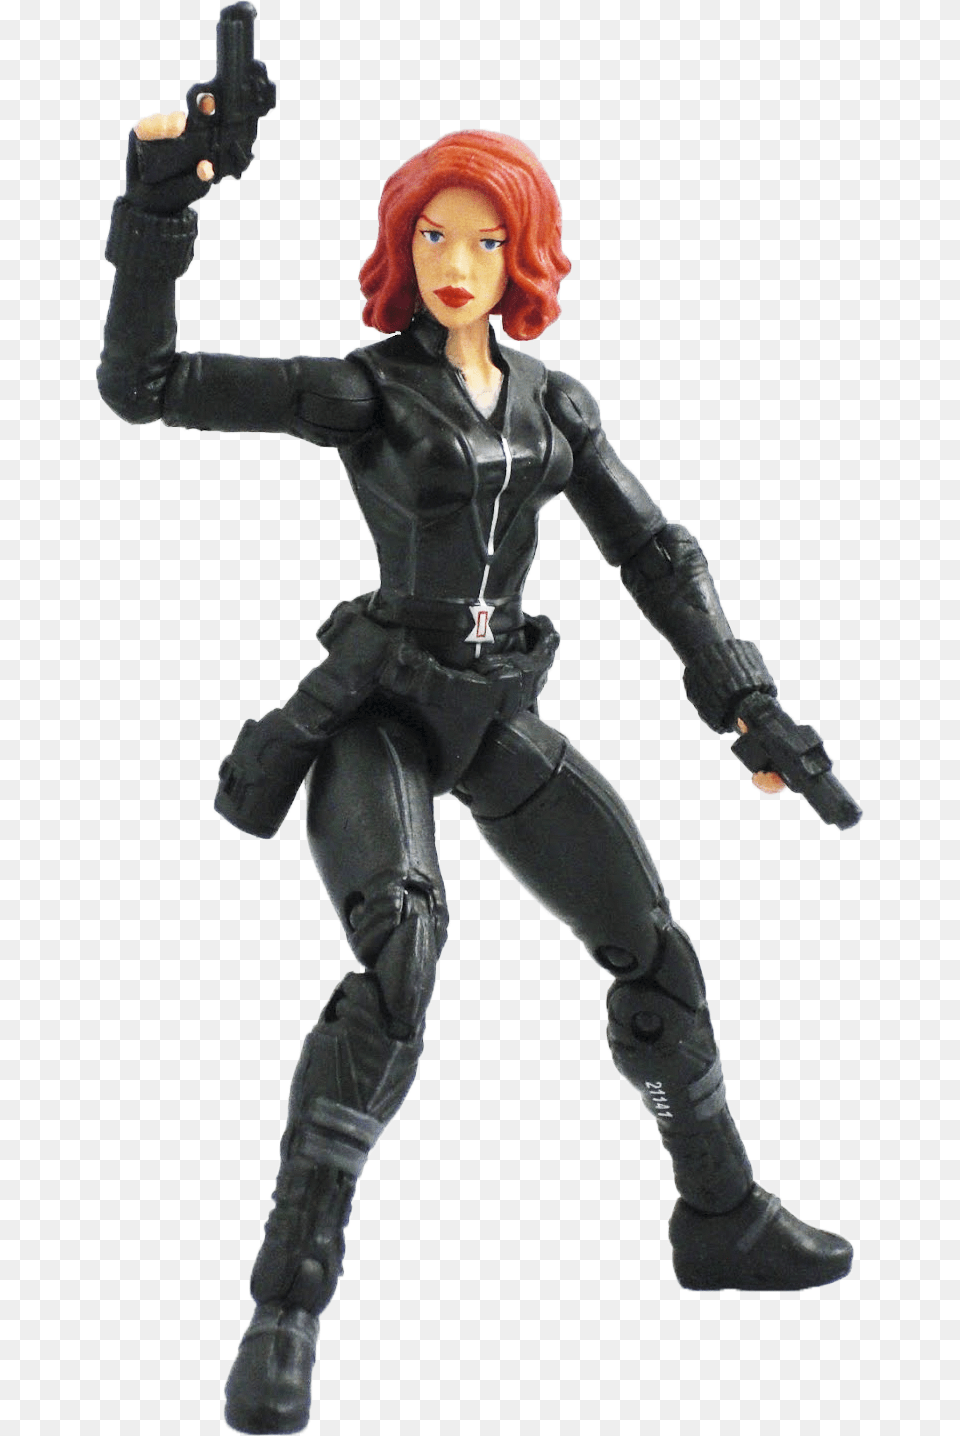 Avengers 2012 Black Widow Grapple Blast Action, Figurine, Adult, Female, Person Png Image